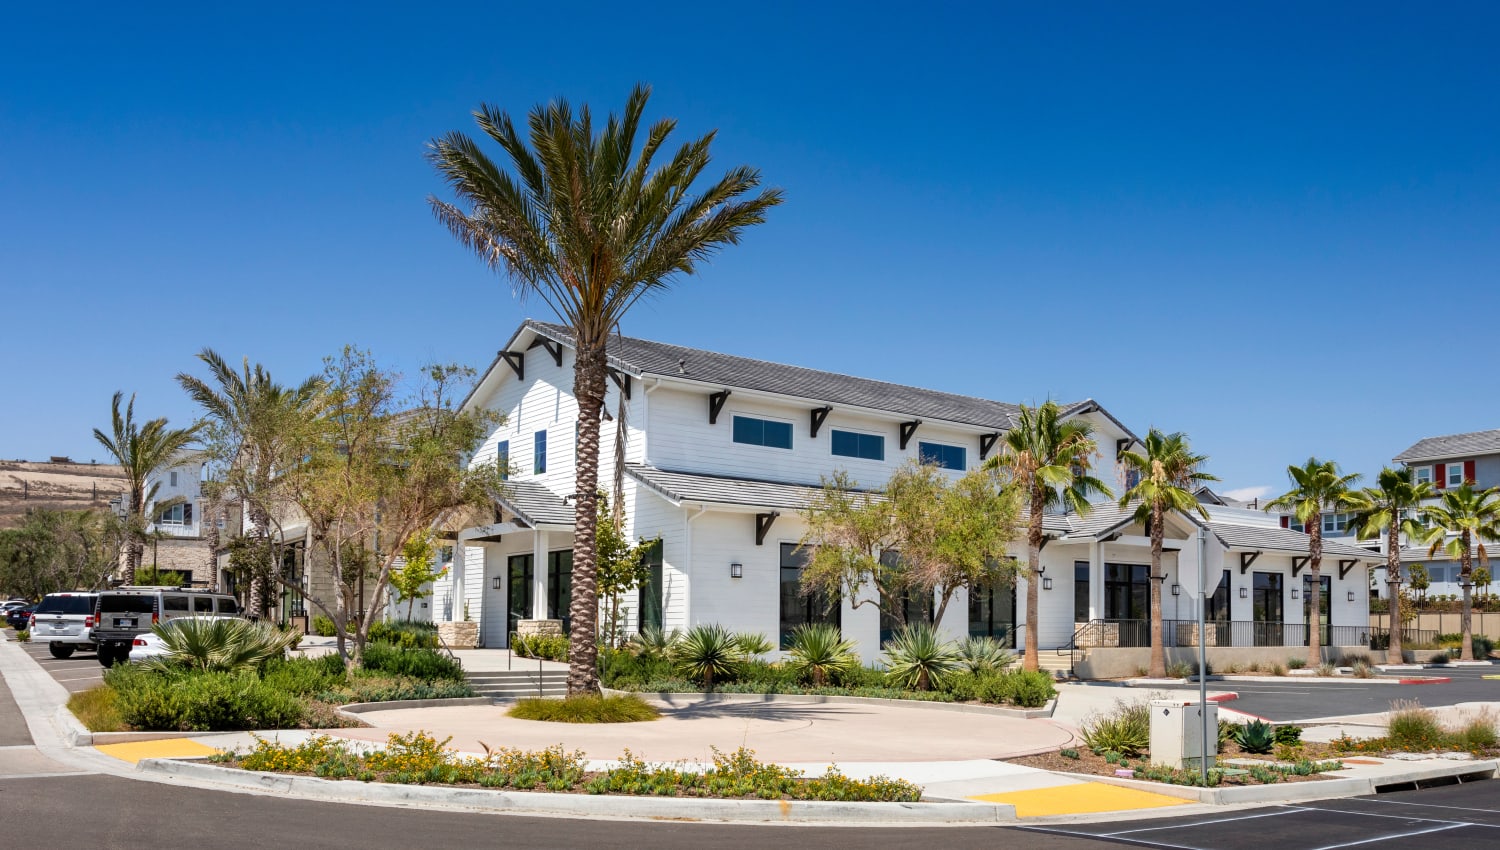 Exterior view from the street corner of The Residences at Escaya in Chula Vista, California